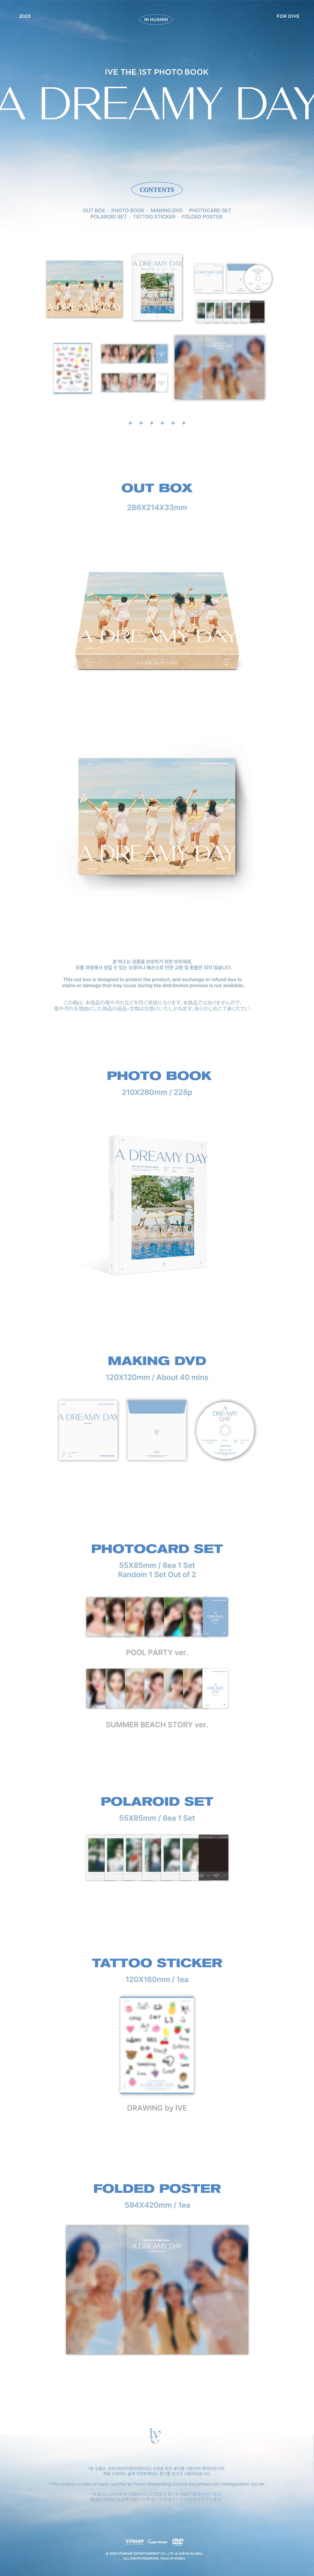 IVE(아이브) - 아이브 첫 번째 포토북 'A DREAMY DAY' / IVE THE 1ST PHOTOBOOK_A DREAMY DAY